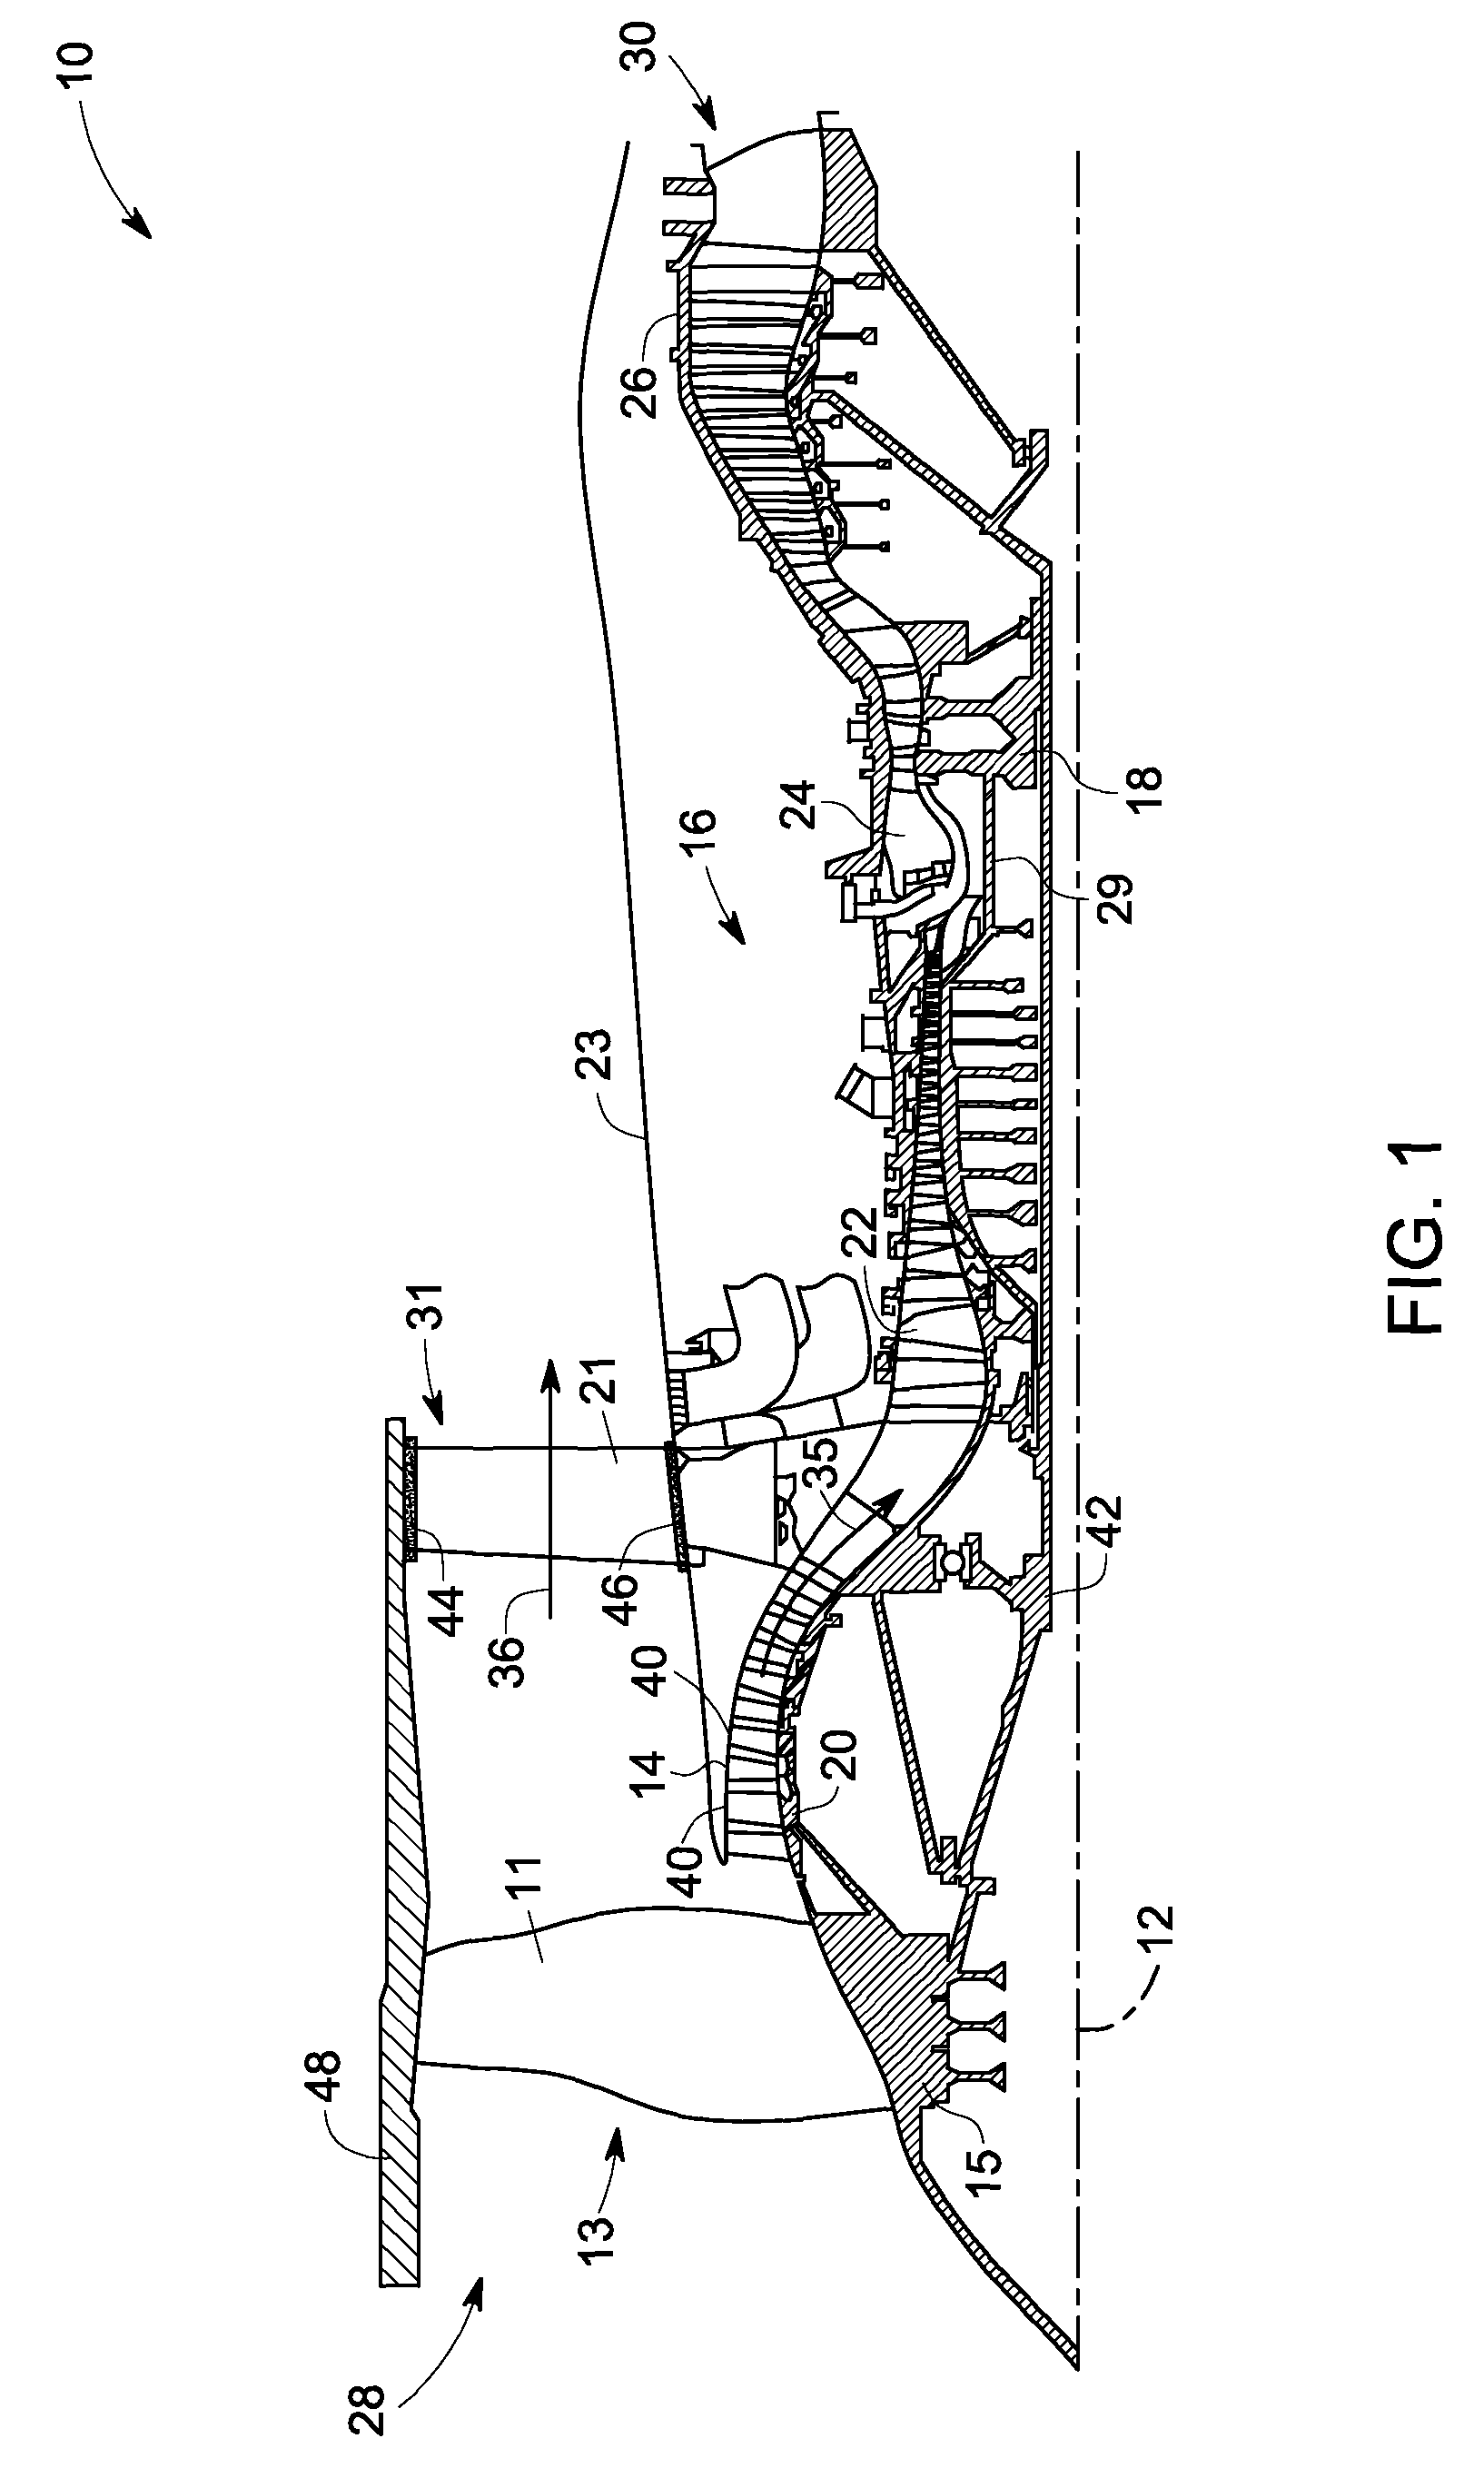 Combined acoustic absorber and heat exchanging outlet guide vanes